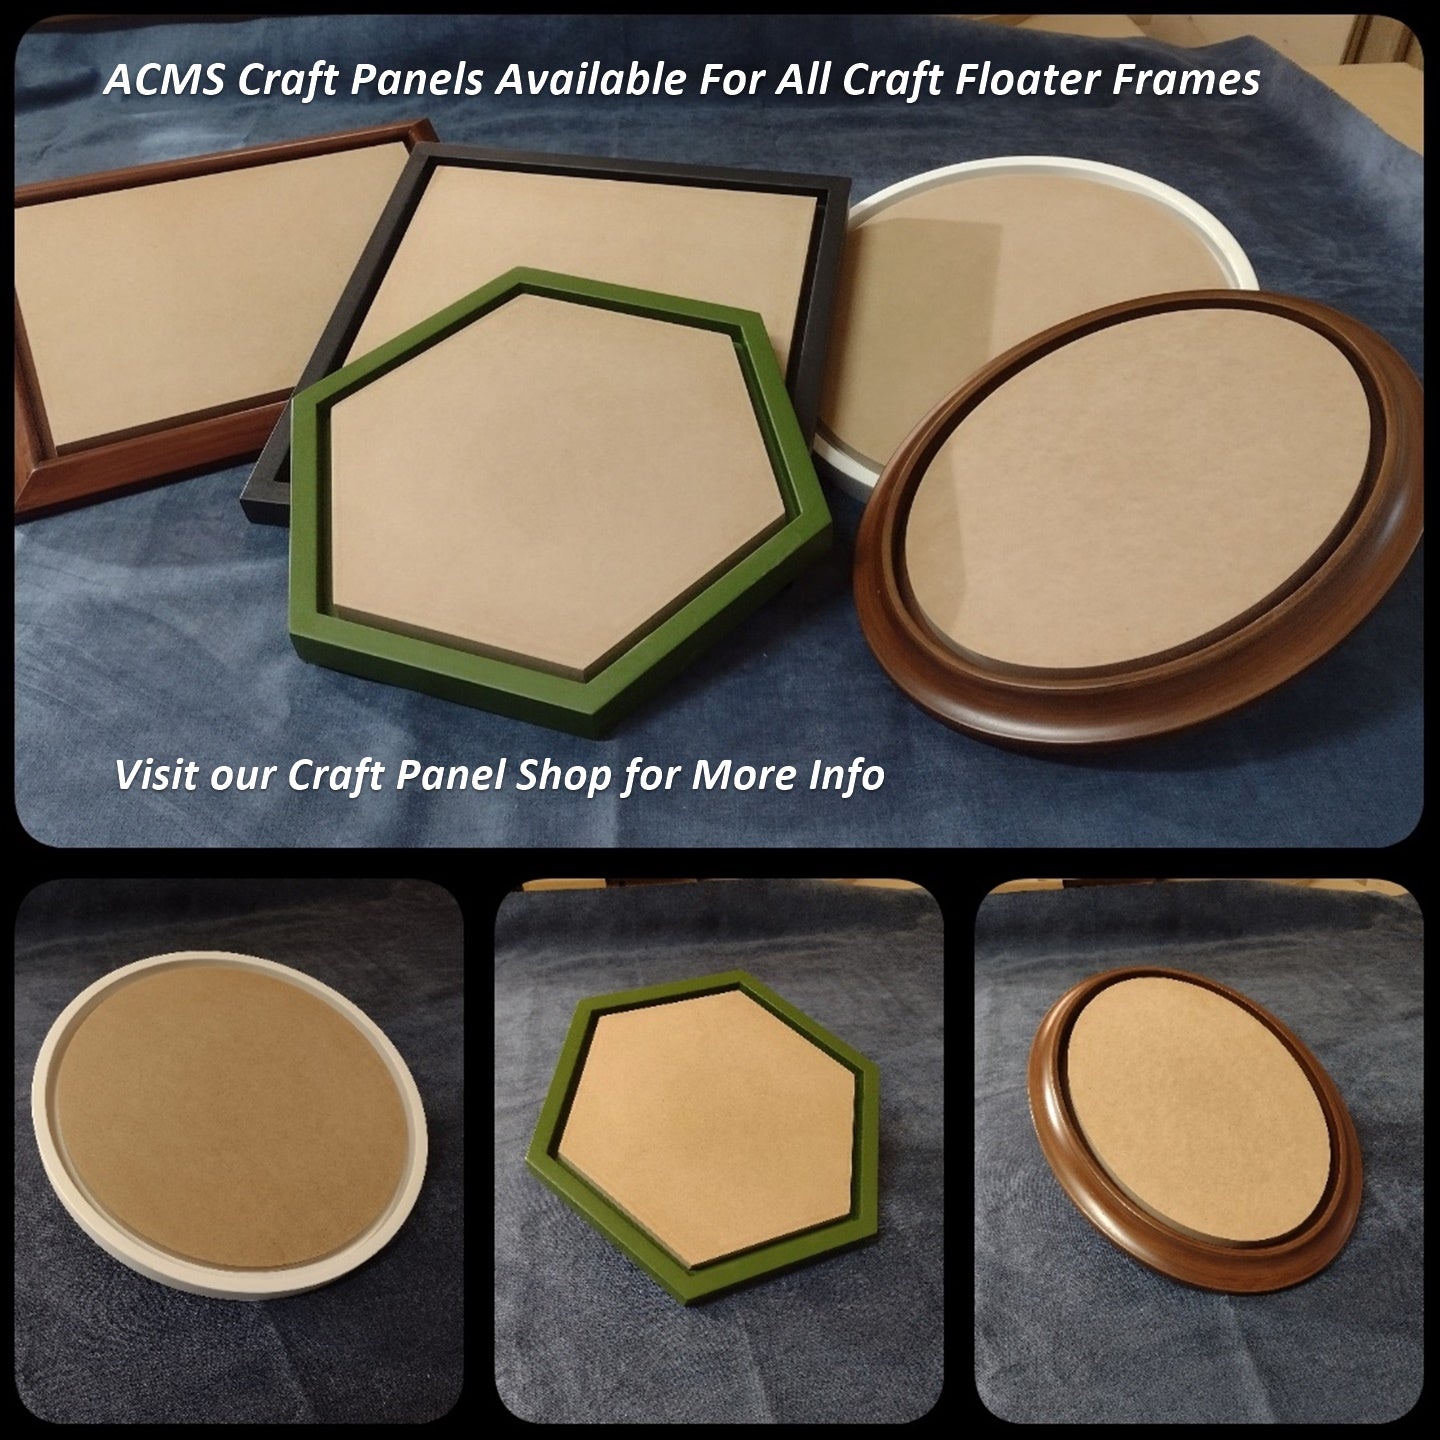 Oval Craft Floater Frame - FLAT 3/4" Profile - 1 1/4" Thick